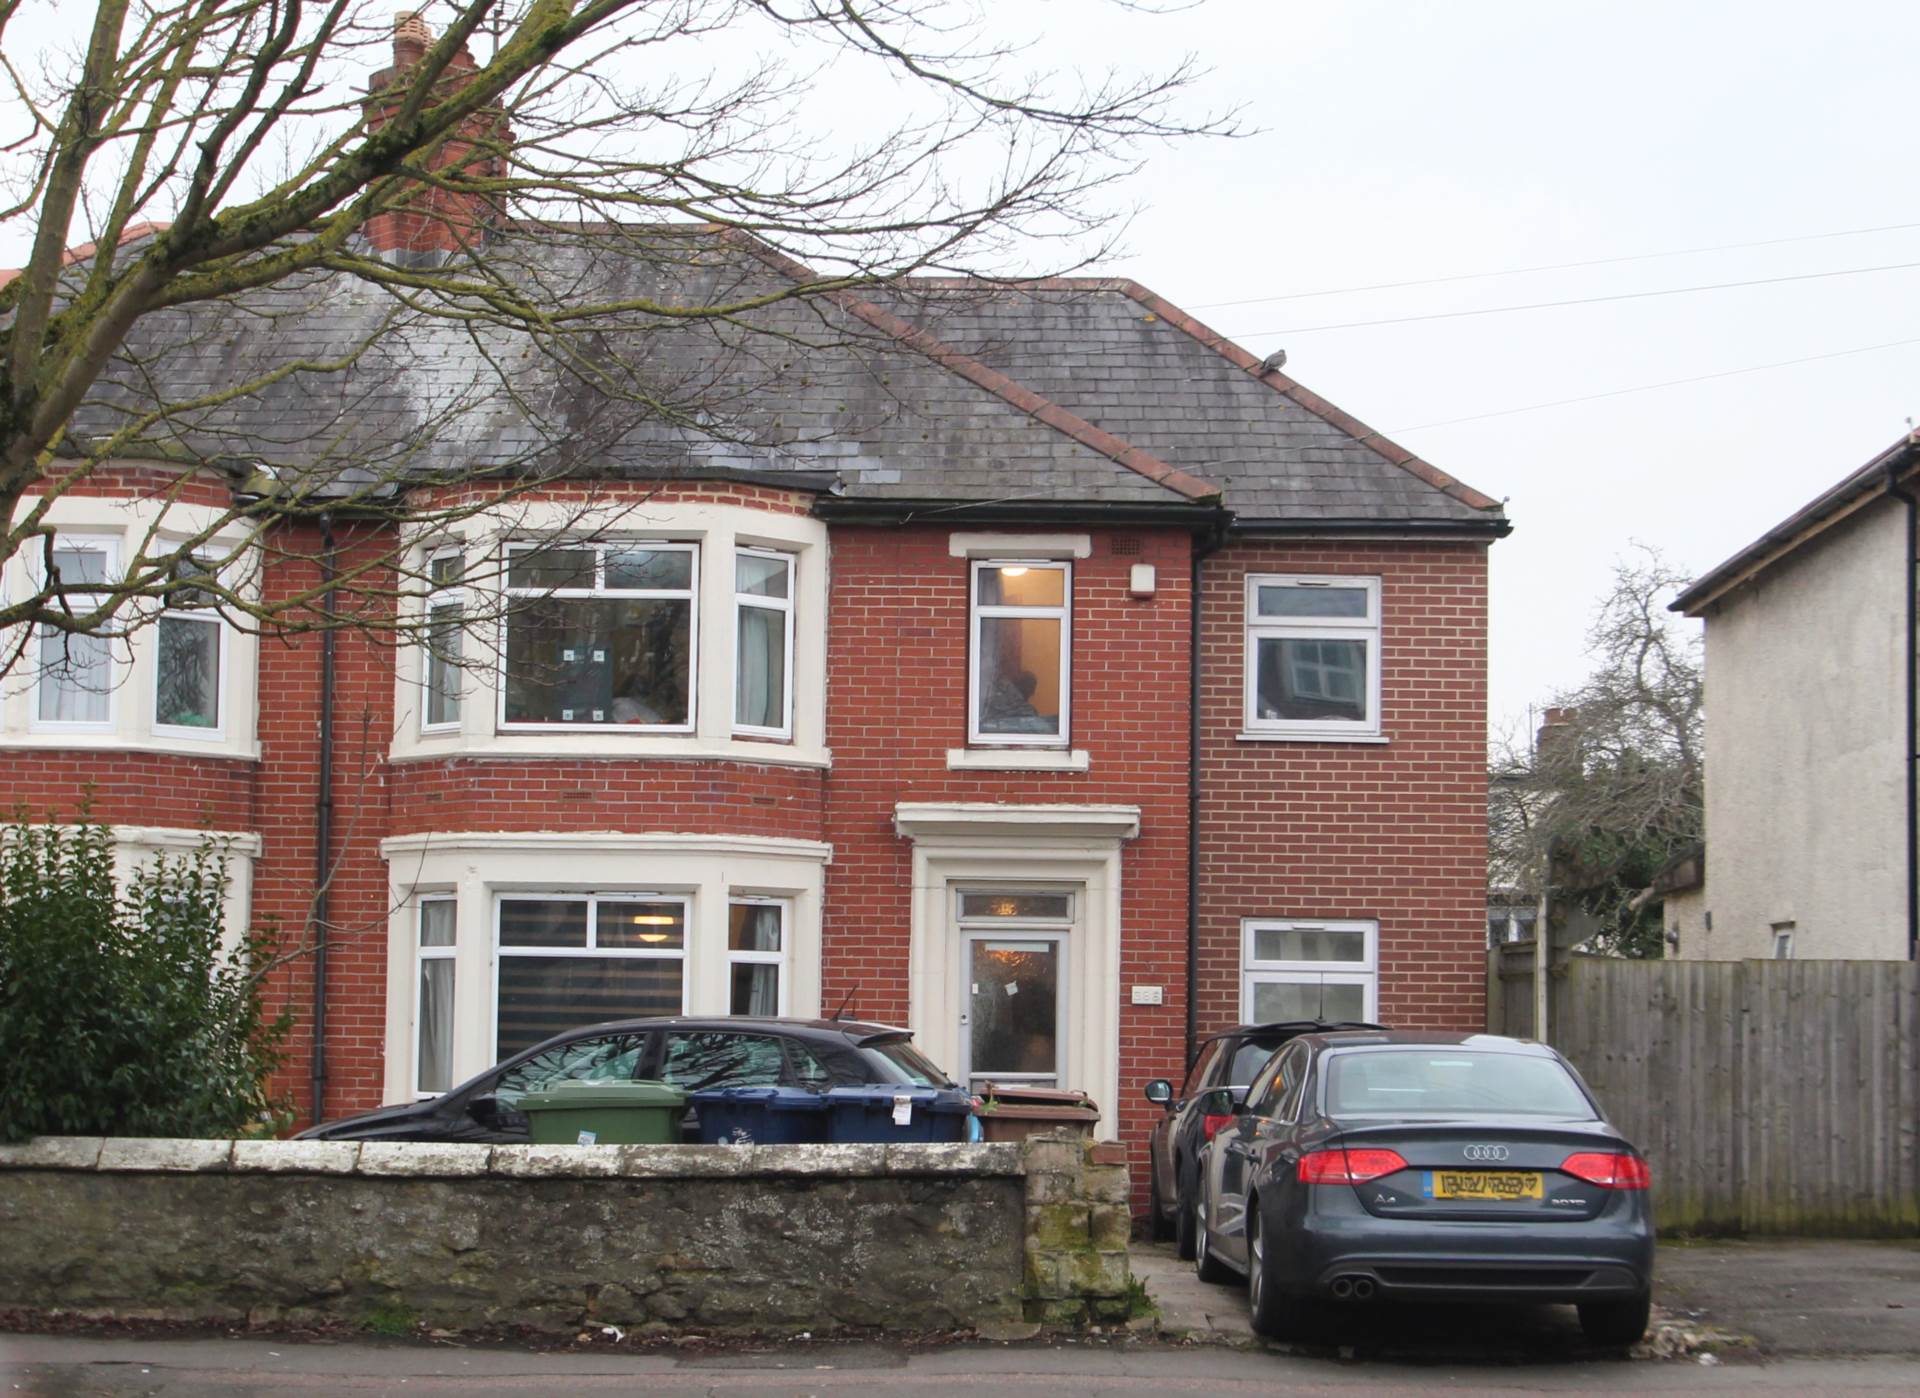 6 bed Semi-Detached House for rent in Oxford. From James C Penny Estate Agents - East Oxford